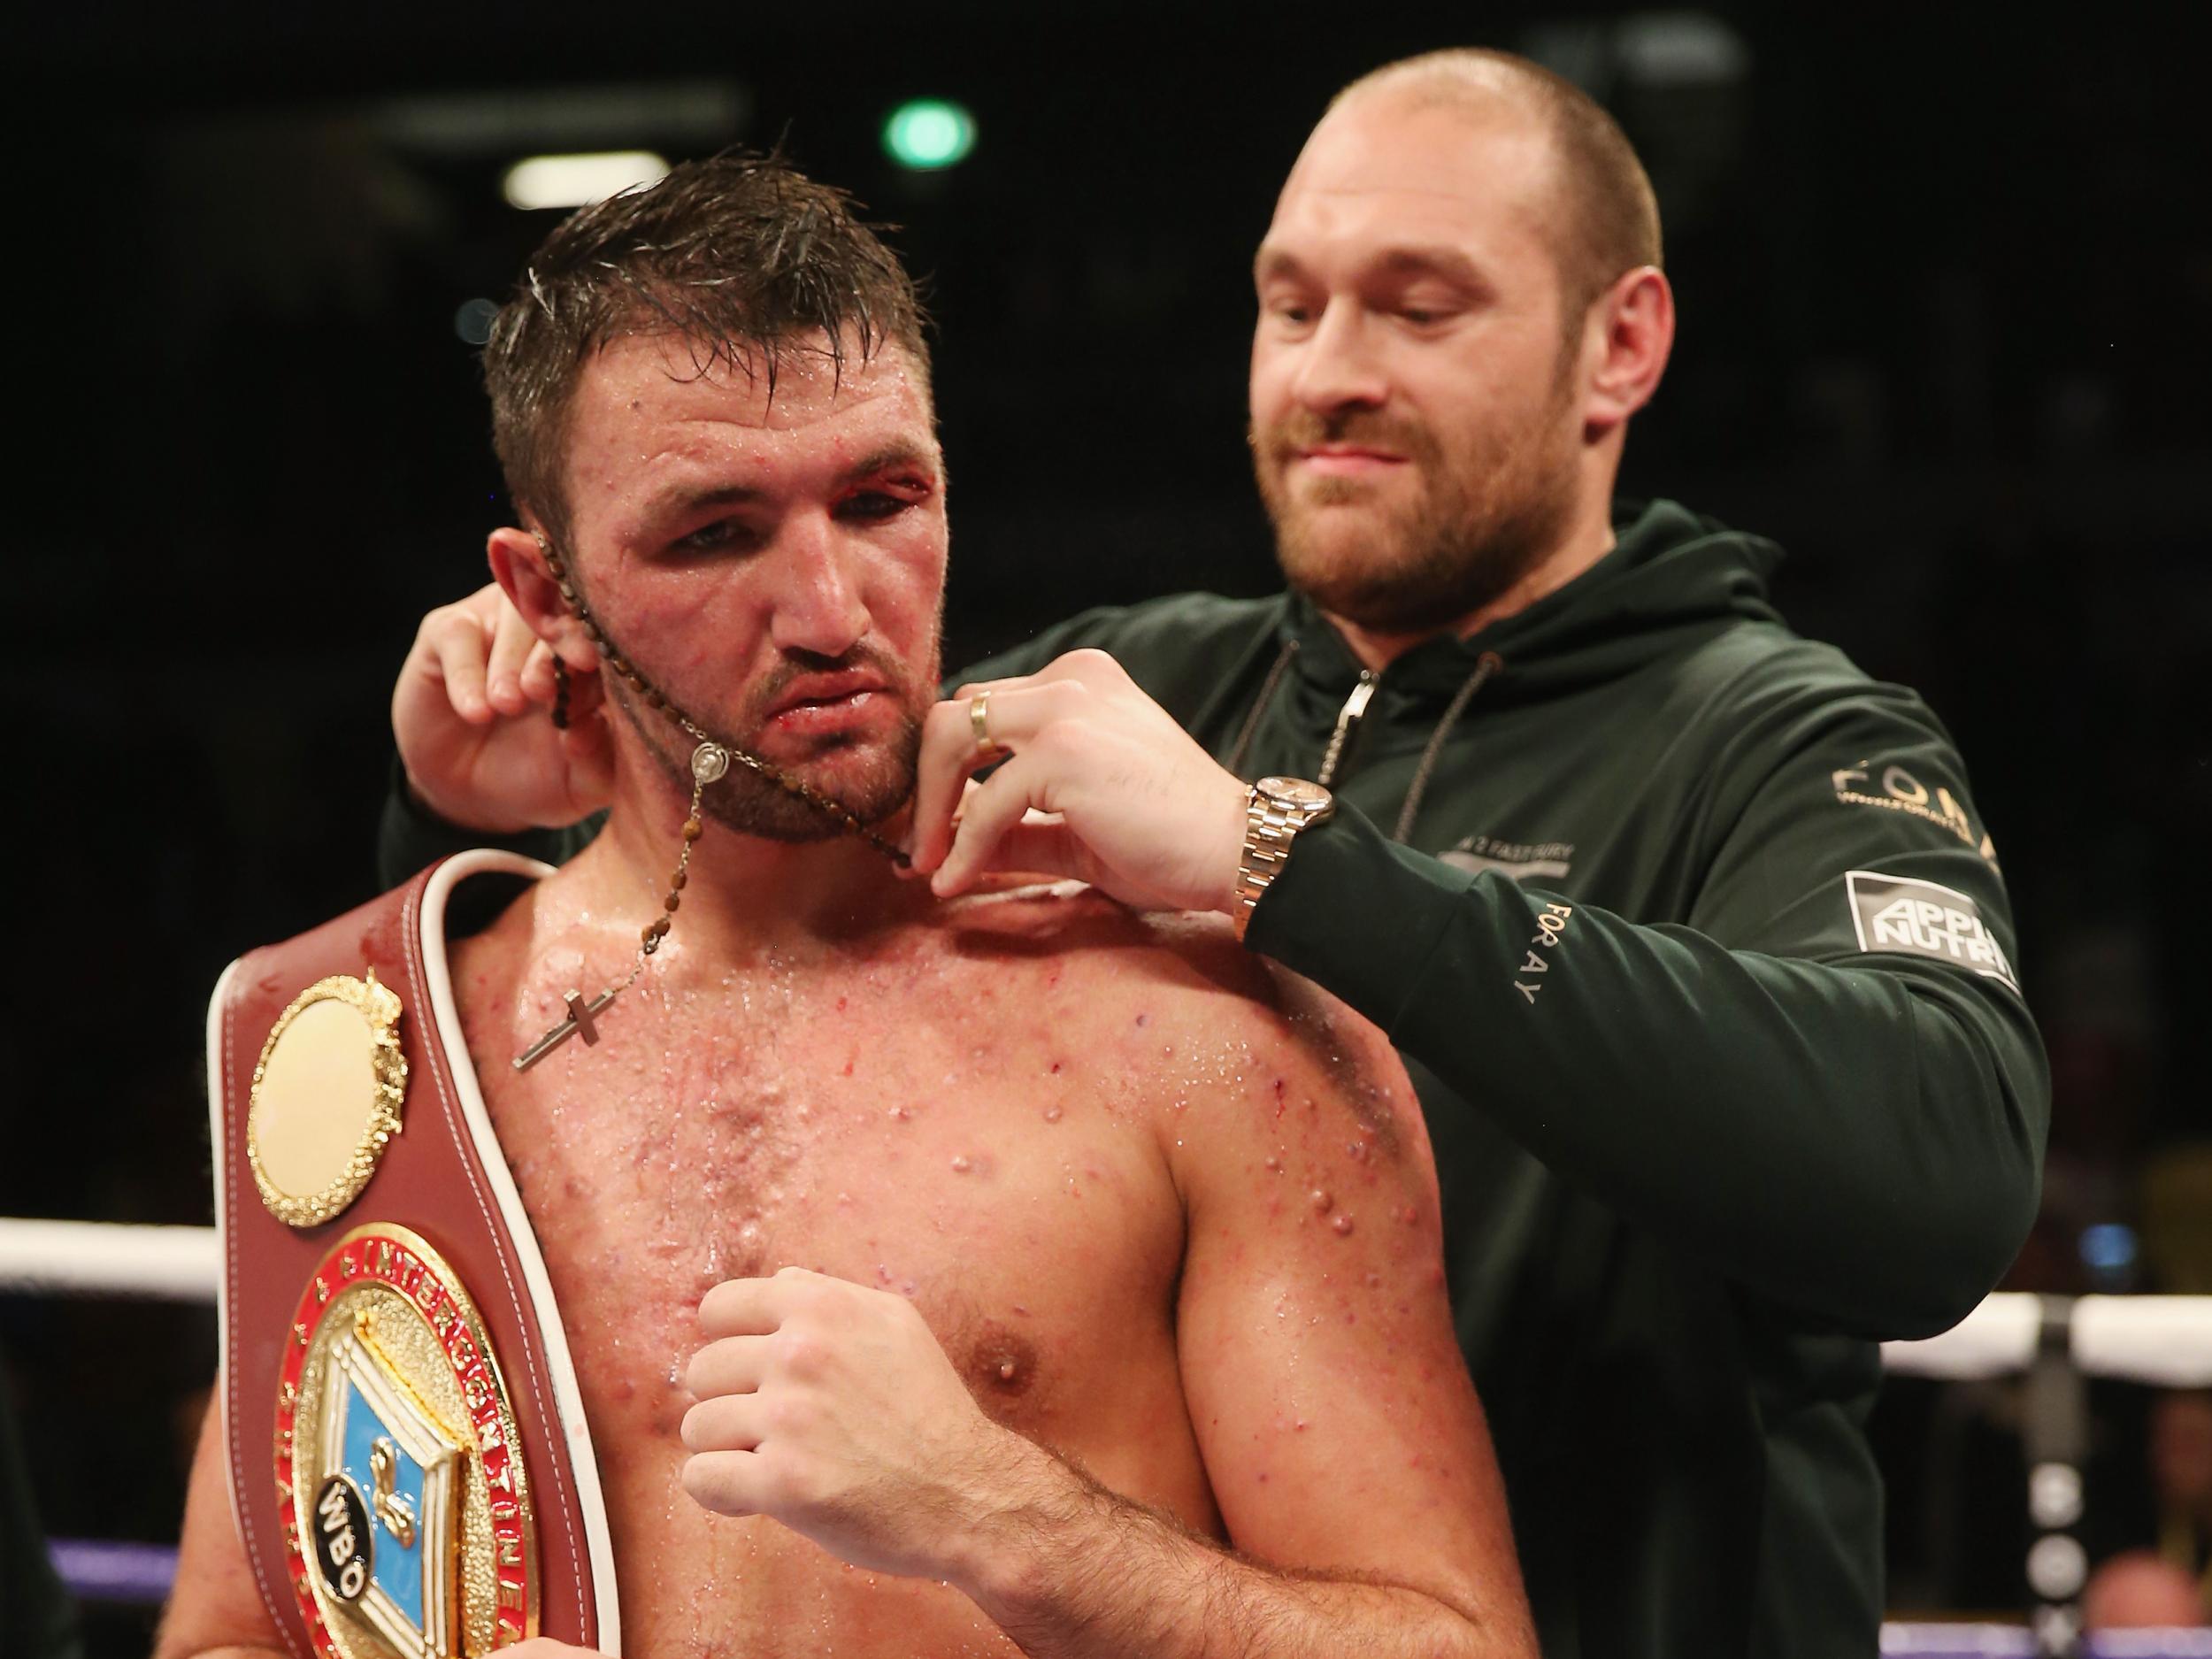 Hughie Fury could be challenging for the WBO title, formerly held by Tyson